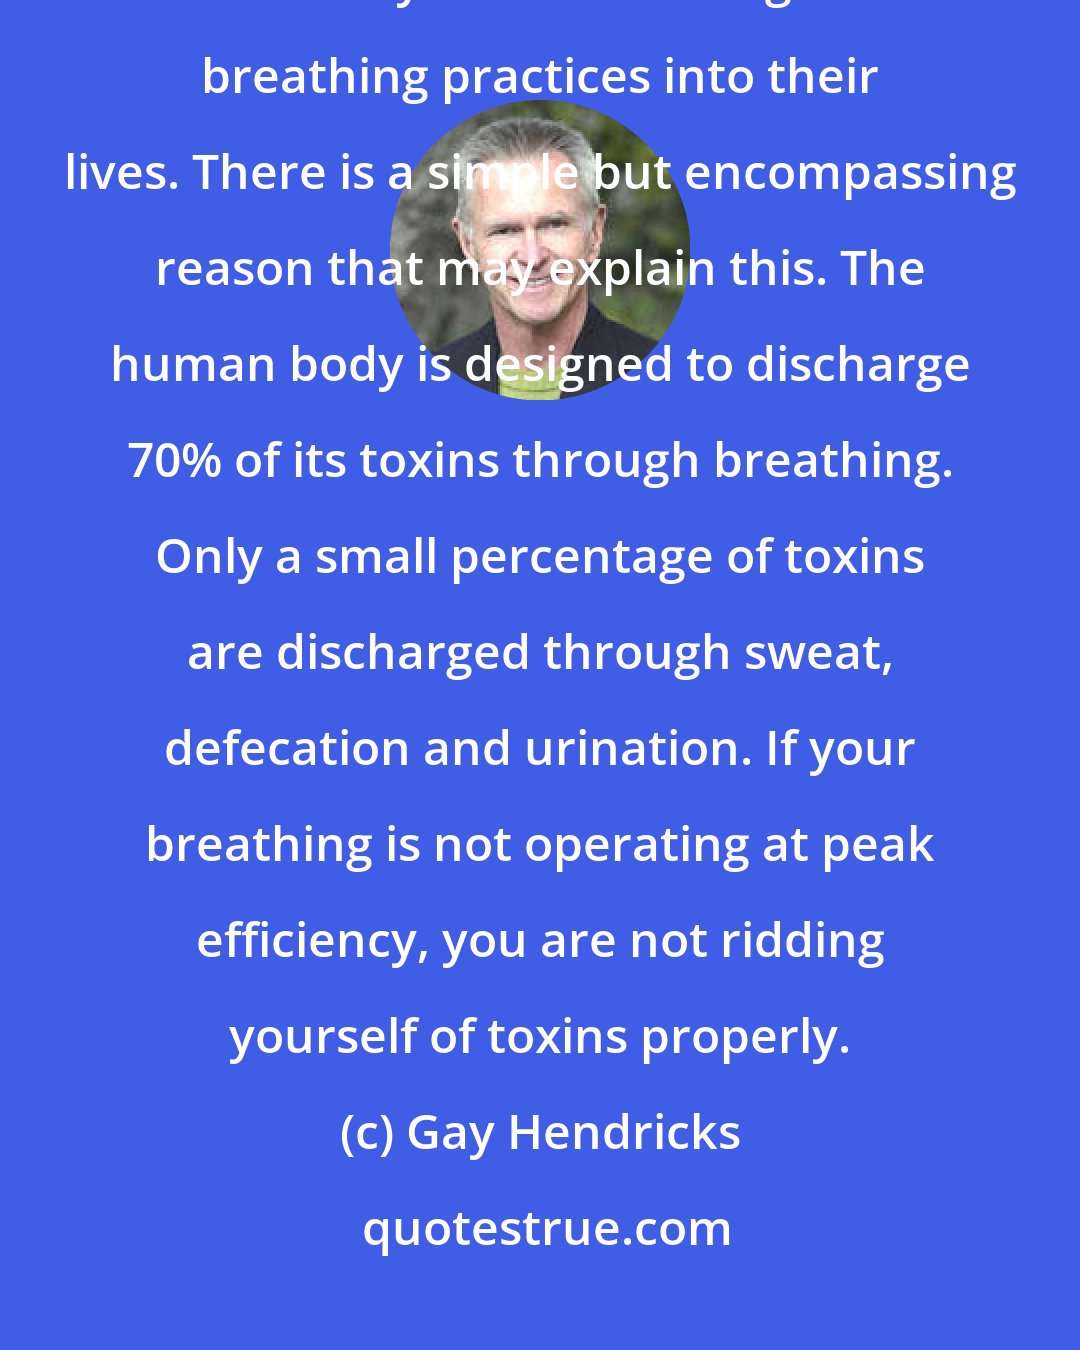 Gay Hendricks: Many healings of other physical troubles have occurred in my clients after they started to integrate breathing practices into their lives. There is a simple but encompassing reason that may explain this. The human body is designed to discharge 70% of its toxins through breathing. Only a small percentage of toxins are discharged through sweat, defecation and urination. If your breathing is not operating at peak efficiency, you are not ridding yourself of toxins properly.